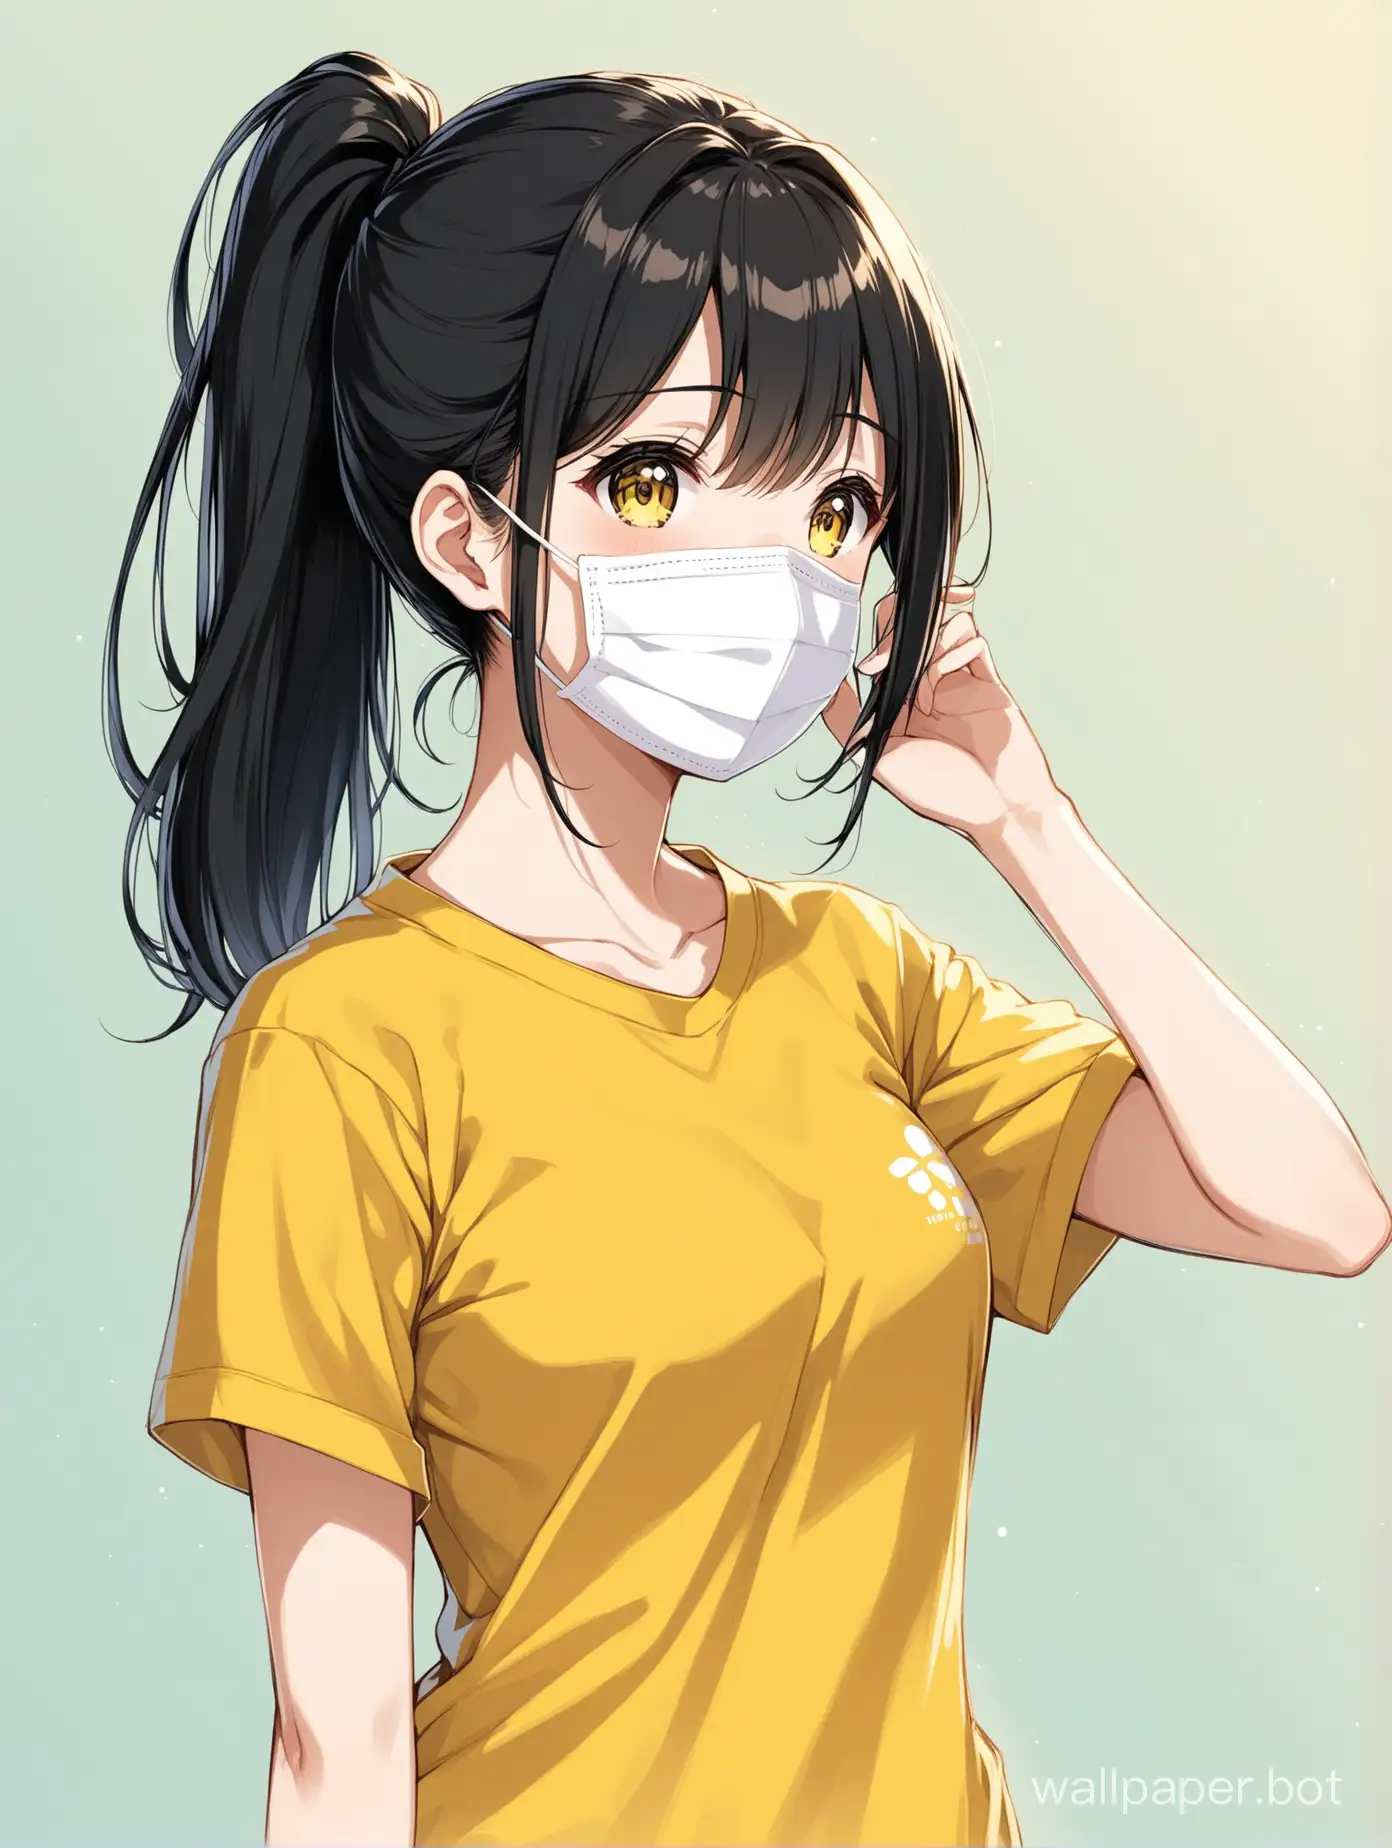 Cute-Anime-Girl-with-Black-Ponytail-Hair-and-White-Medical-Face-Mask-in-Yellow-TShirt